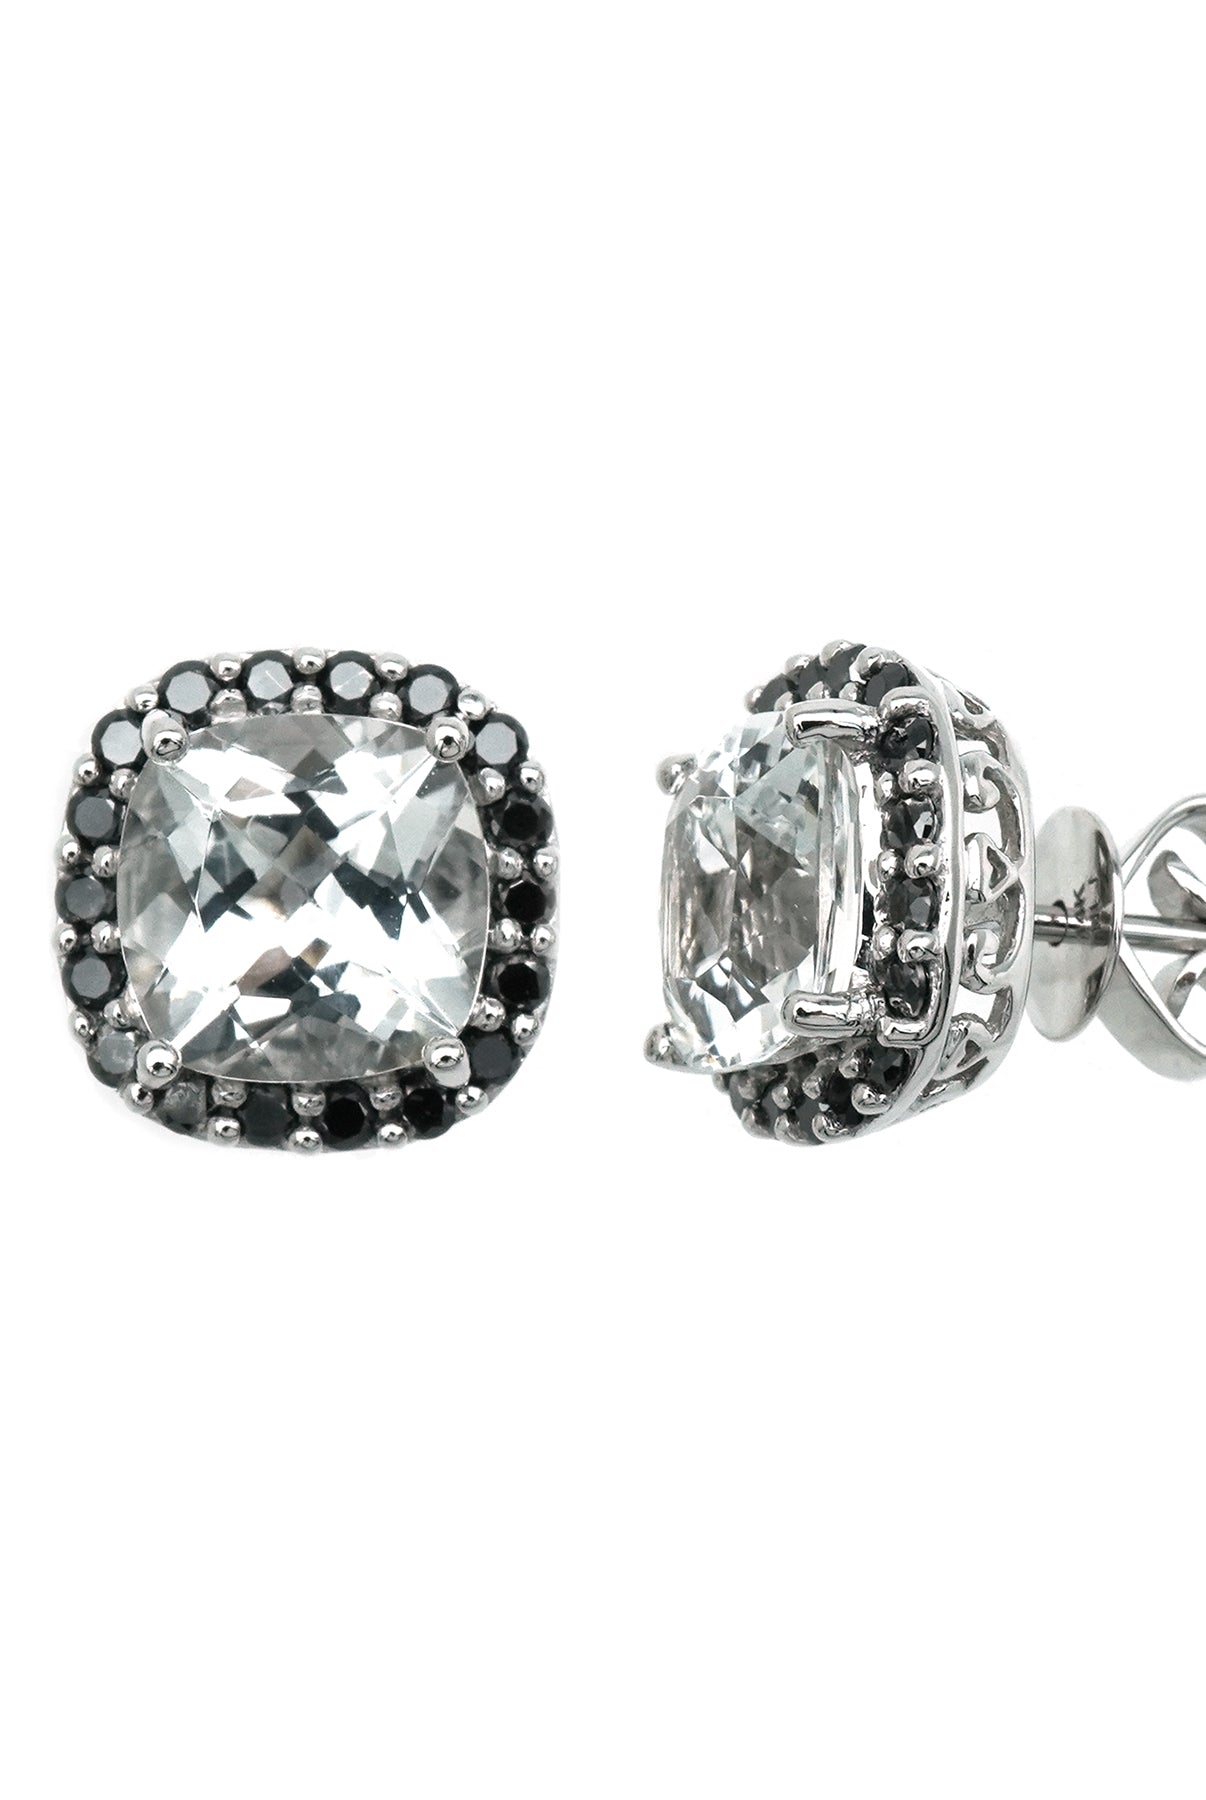 Black and white earrings with white topaz and black diamonds. Monochrome classic stud earrings.